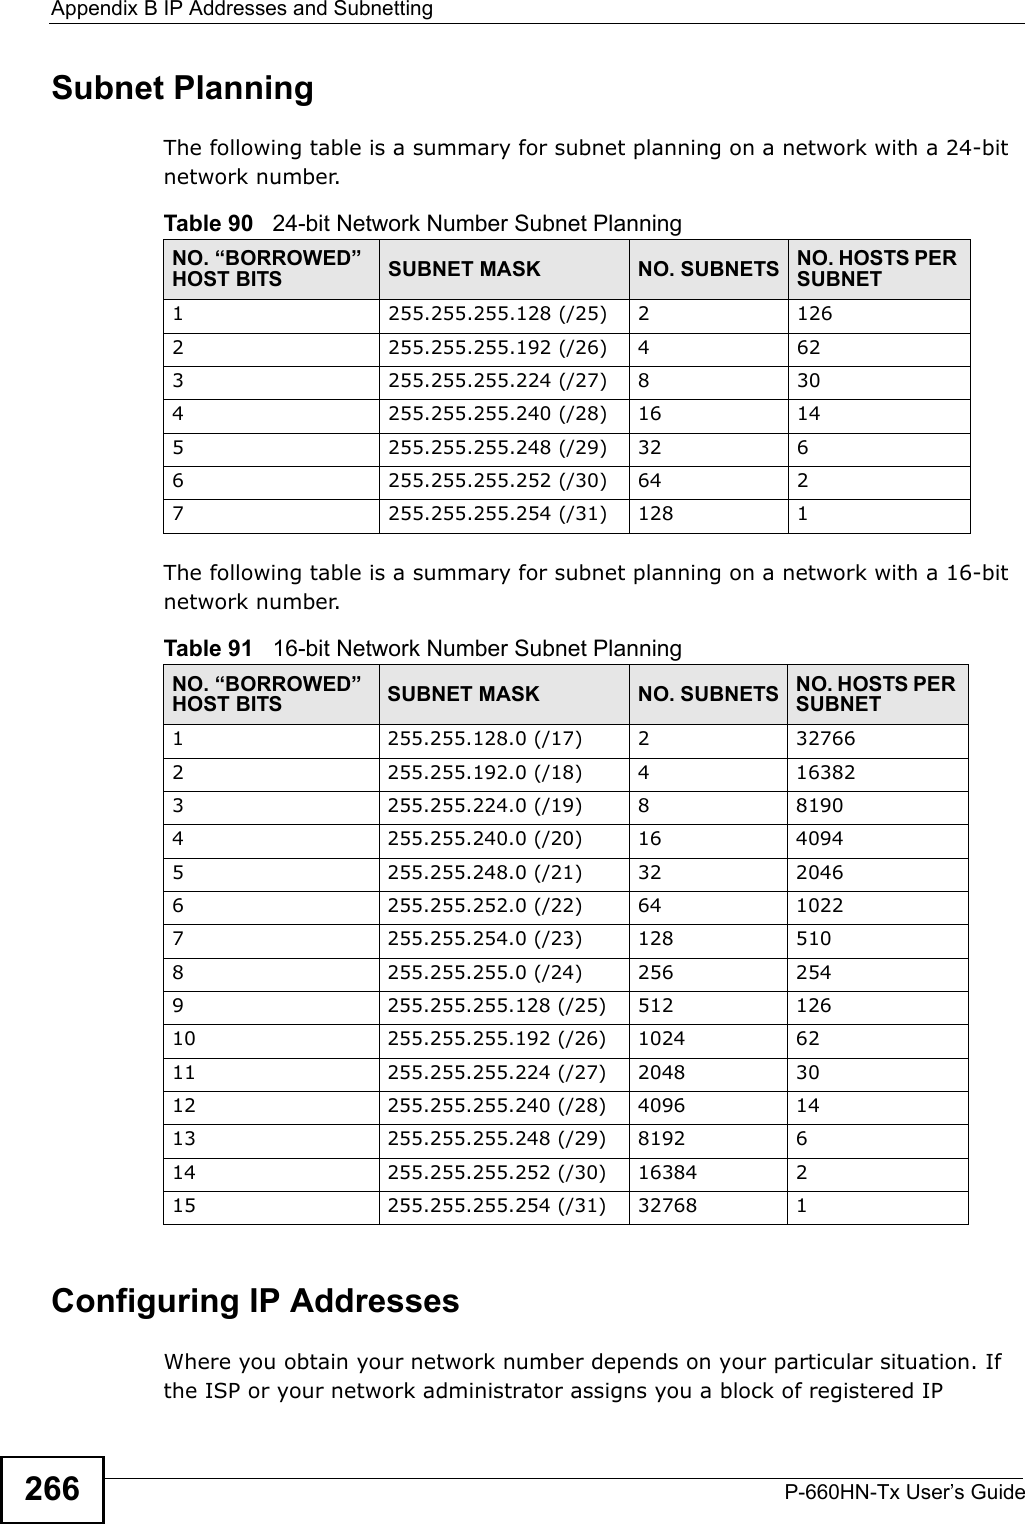 Appendix B IP Addresses and SubnettingP-660HN-Tx User’s Guide266Subnet PlanningThe following table is a summary for subnet planning on a network with a 24-bit network number.The following table is a summary for subnet planning on a network with a 16-bit network number. Configuring IP AddressesWhere you obtain your network number depends on your particular situation. If the ISP or your network administrator assigns you a block of registered IP Table 90   24-bit Network Number Subnet PlanningNO. “BORROWED” HOST BITS SUBNET MASK NO. SUBNETS NO. HOSTS PER SUBNET1255.255.255.128 (/25) 21262255.255.255.192 (/26) 4623255.255.255.224 (/27) 8304255.255.255.240 (/28) 16 145255.255.255.248 (/29) 32 66255.255.255.252 (/30) 64 27255.255.255.254 (/31) 128 1Table 91   16-bit Network Number Subnet PlanningNO. “BORROWED” HOST BITS SUBNET MASK NO. SUBNETS NO. HOSTS PER SUBNET1255.255.128.0 (/17) 2327662255.255.192.0 (/18) 4163823255.255.224.0 (/19) 881904255.255.240.0 (/20) 16 40945255.255.248.0 (/21) 32 20466255.255.252.0 (/22) 64 10227255.255.254.0 (/23) 128 5108255.255.255.0 (/24) 256 2549255.255.255.128 (/25) 512 12610 255.255.255.192 (/26) 1024 6211 255.255.255.224 (/27) 2048 3012 255.255.255.240 (/28) 4096 1413 255.255.255.248 (/29) 8192 614 255.255.255.252 (/30) 16384 215 255.255.255.254 (/31) 32768 1